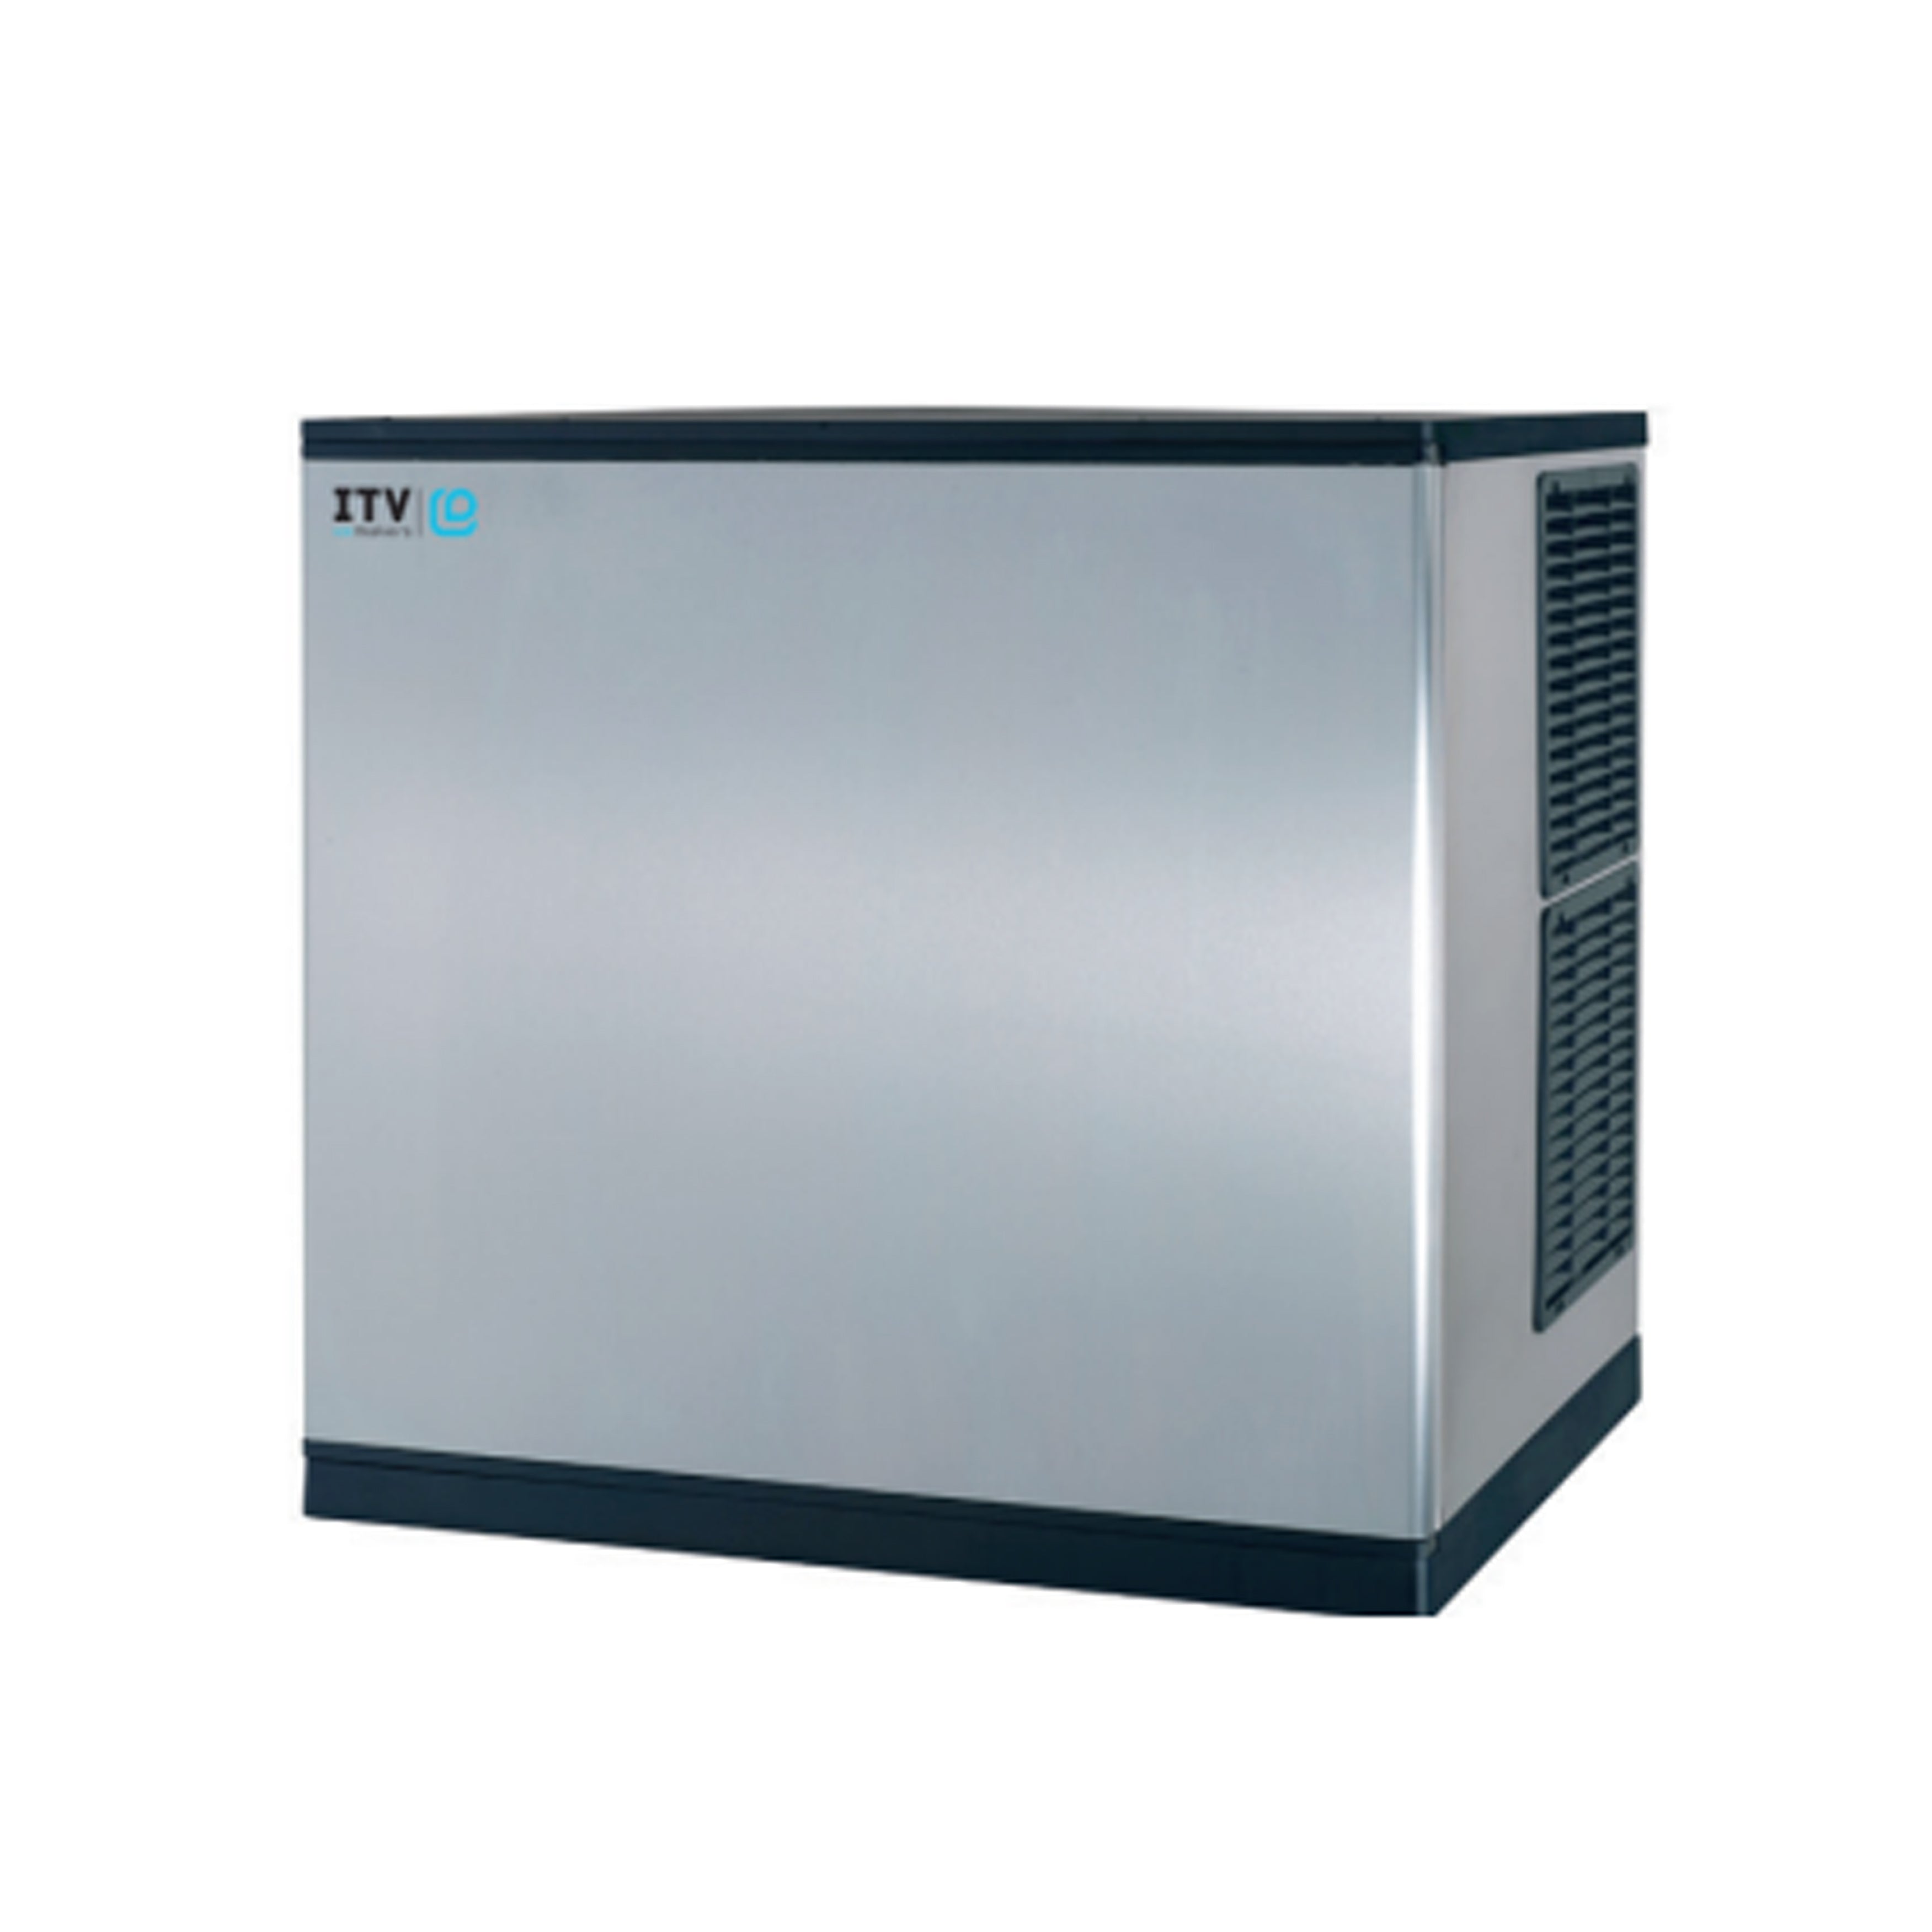 ITV - SPIKA MS 1000 (2), Commercial Spika Cubers Ice Maker Modular Ice Cube Machine 974lbs